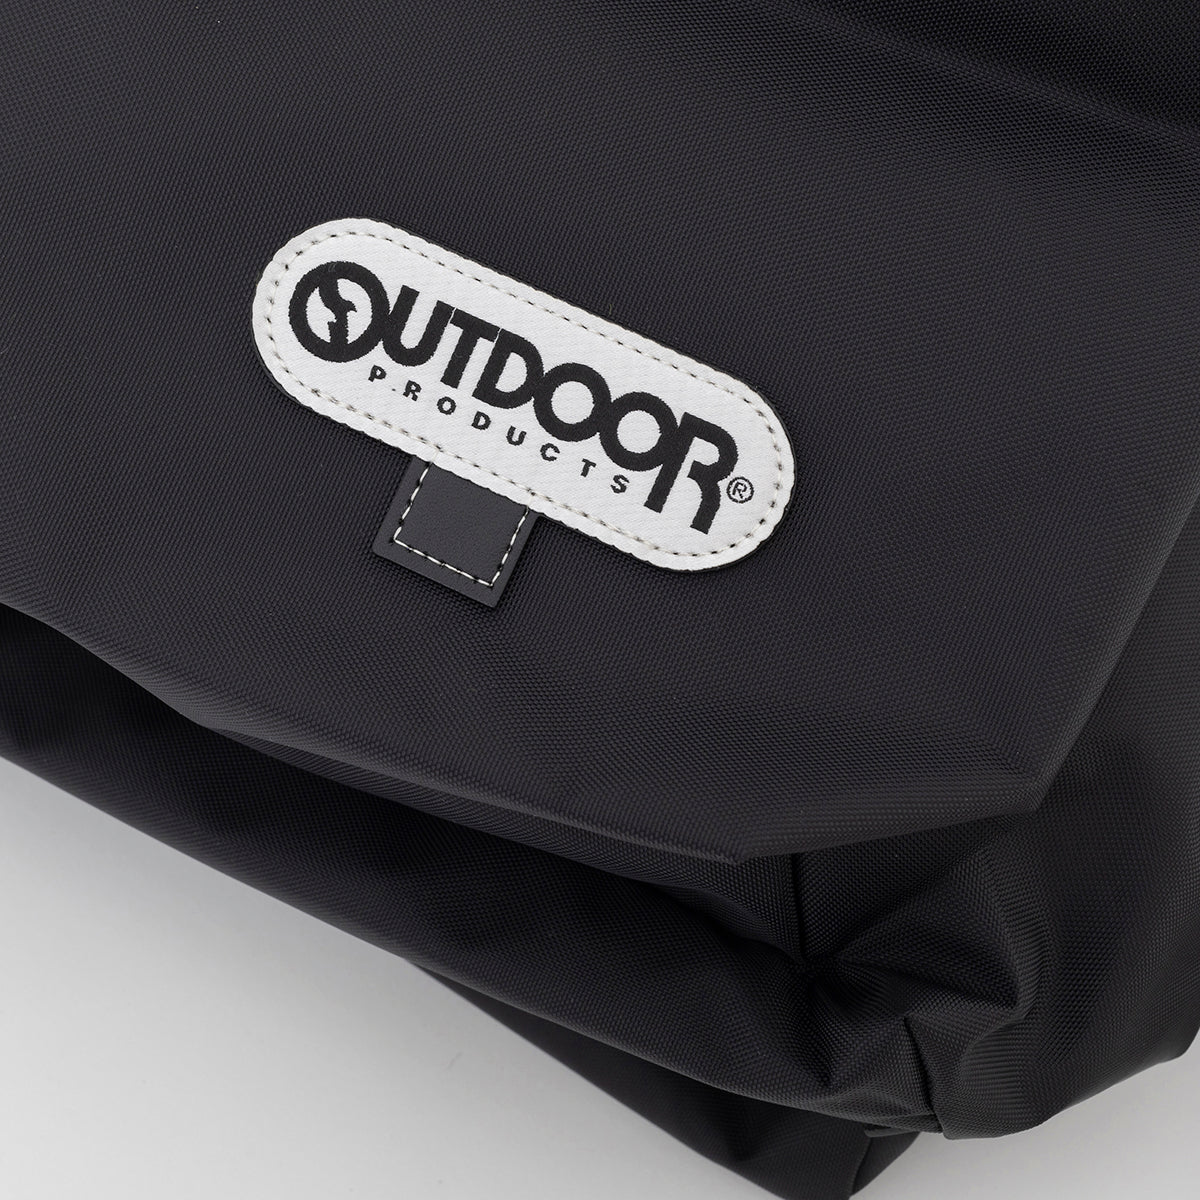 OUTDOOR PRODUCTS デイパック MADE IN USA